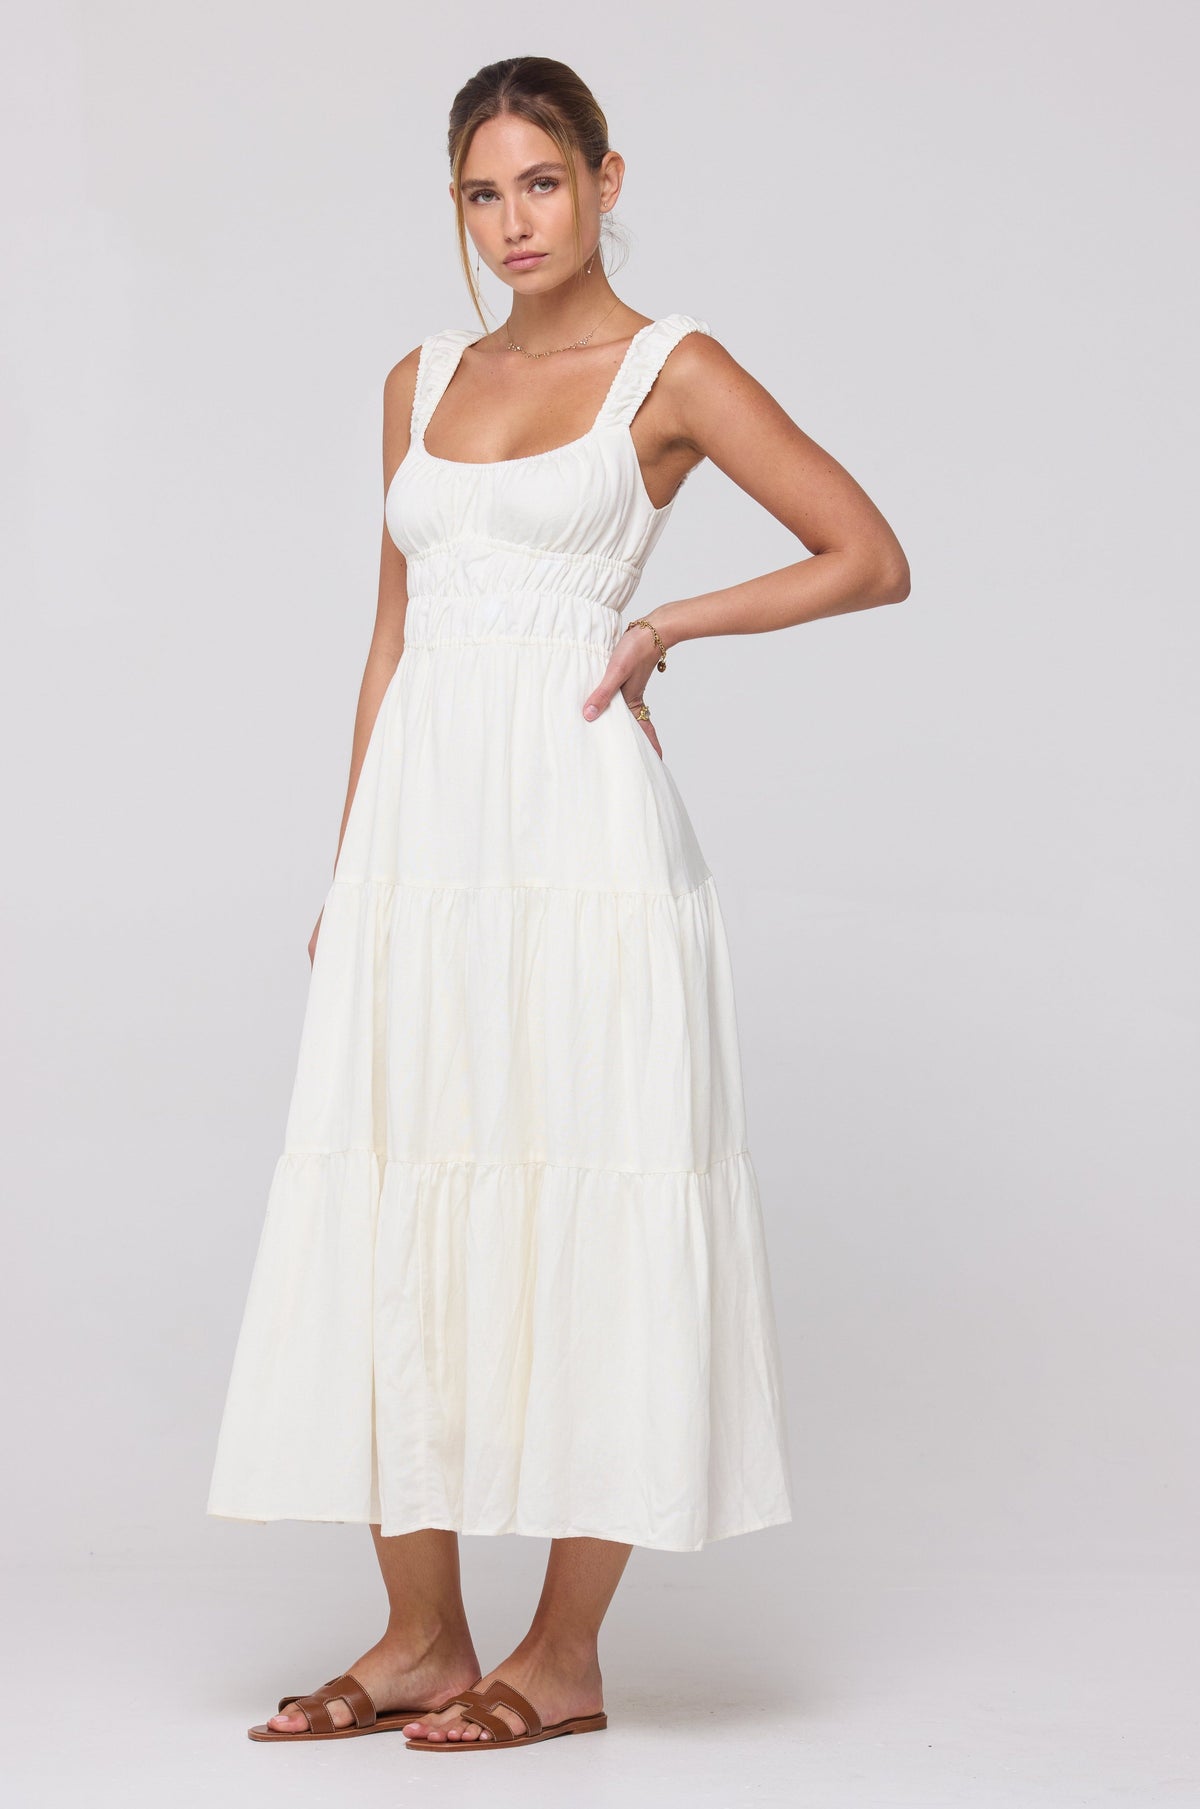 This is an image of Tori Dress in White Linen - RESA featuring a model wearing the dress